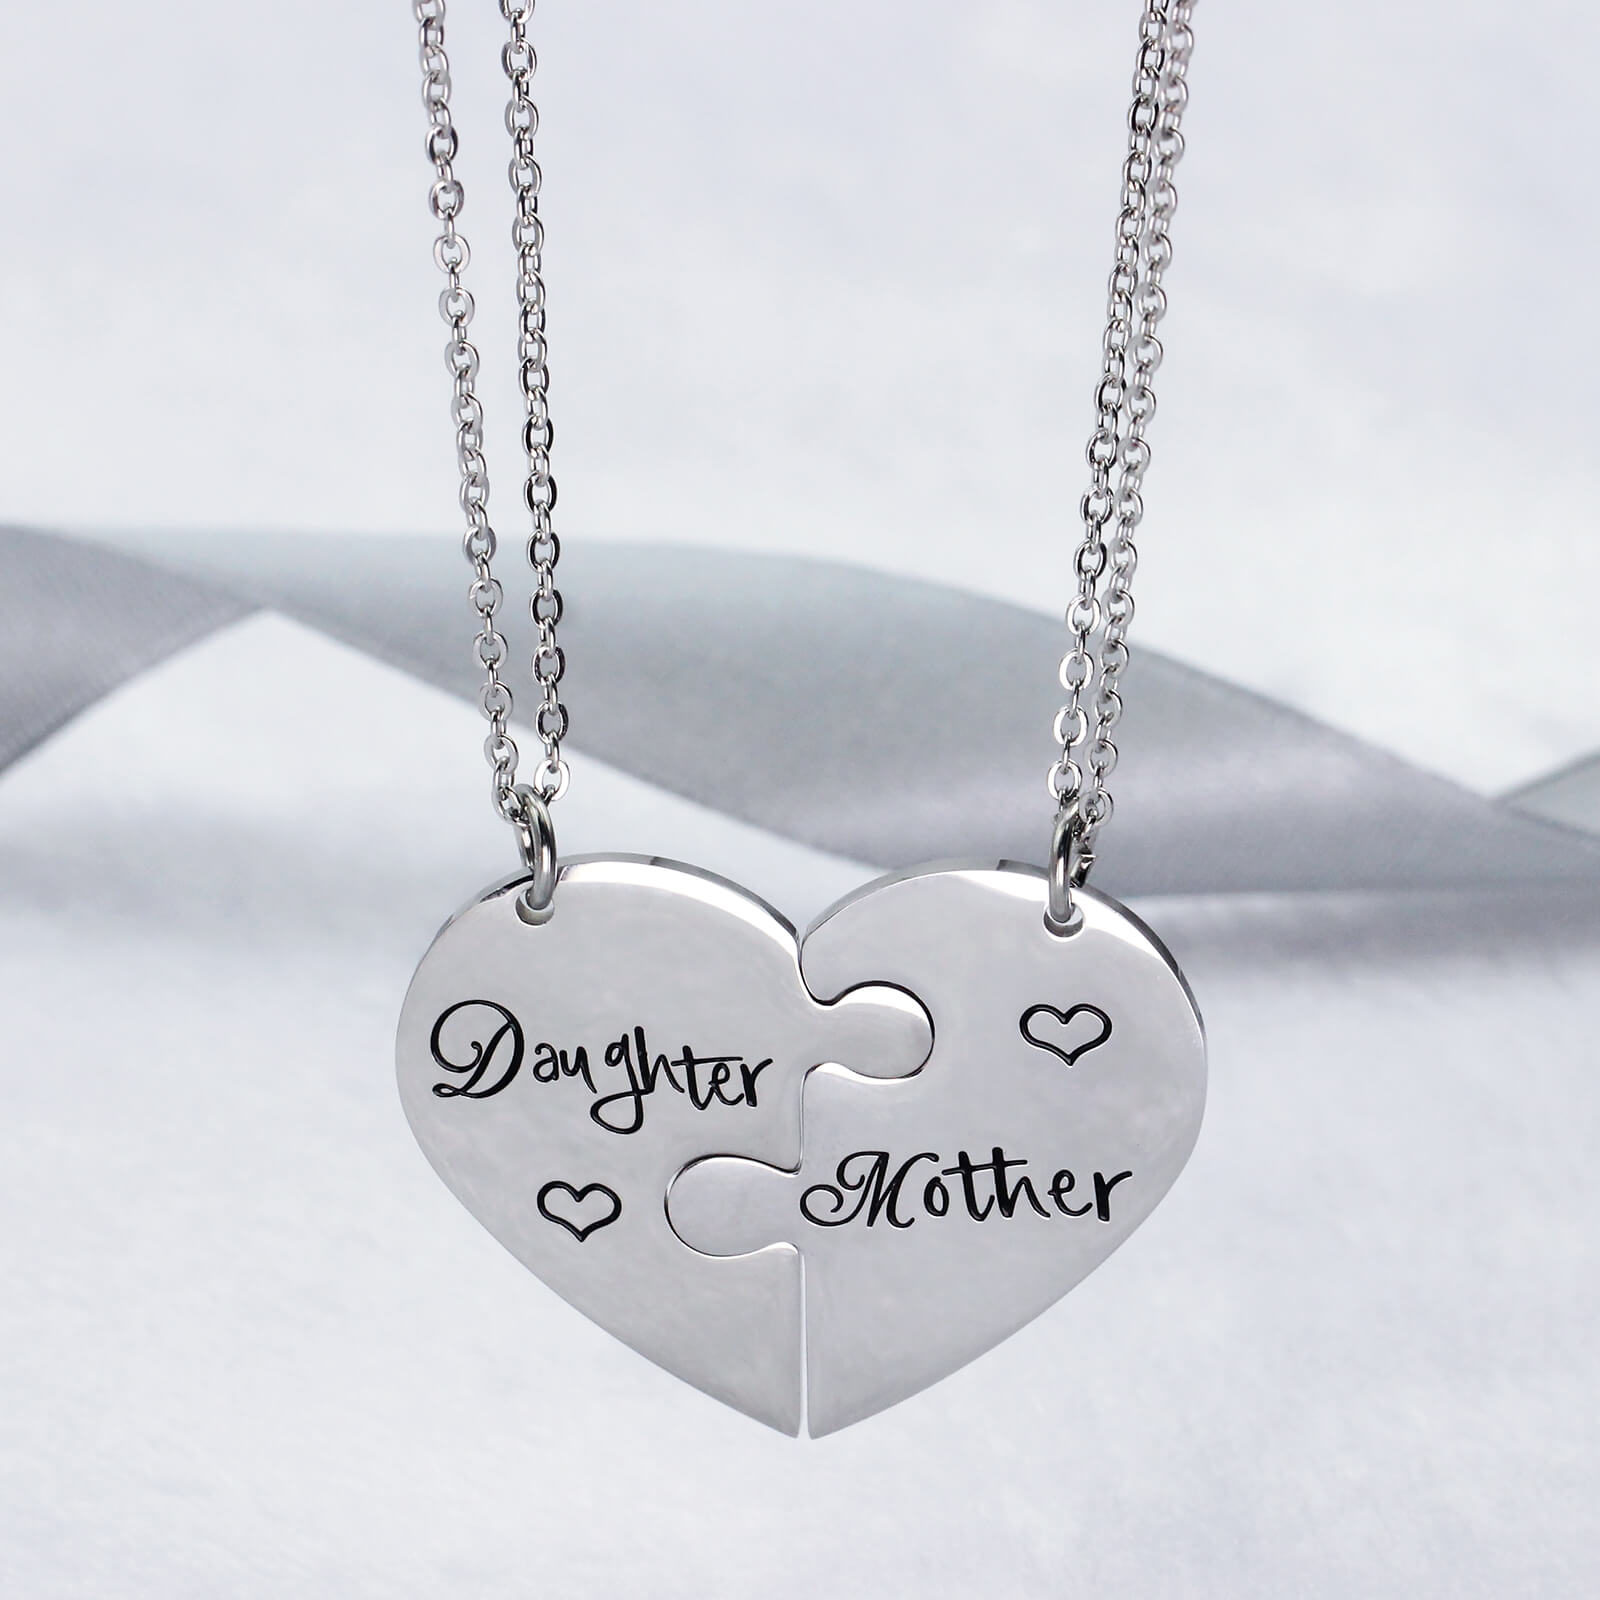 Daughter Mother Stainless Steel Necklace STC 1015 S